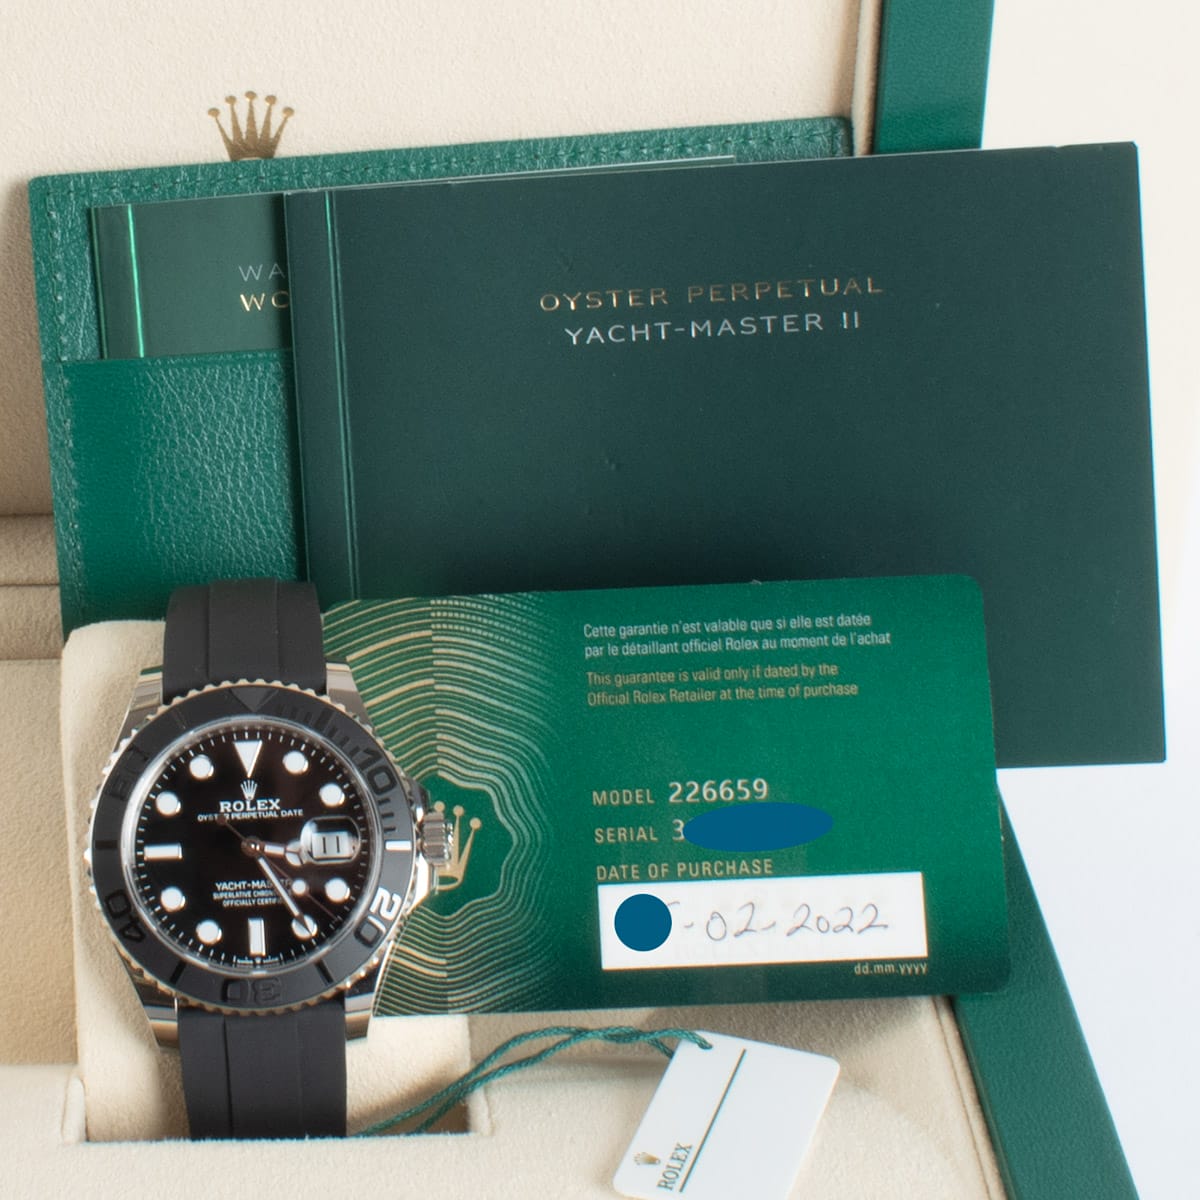 View in Box of Yacht-Master 42